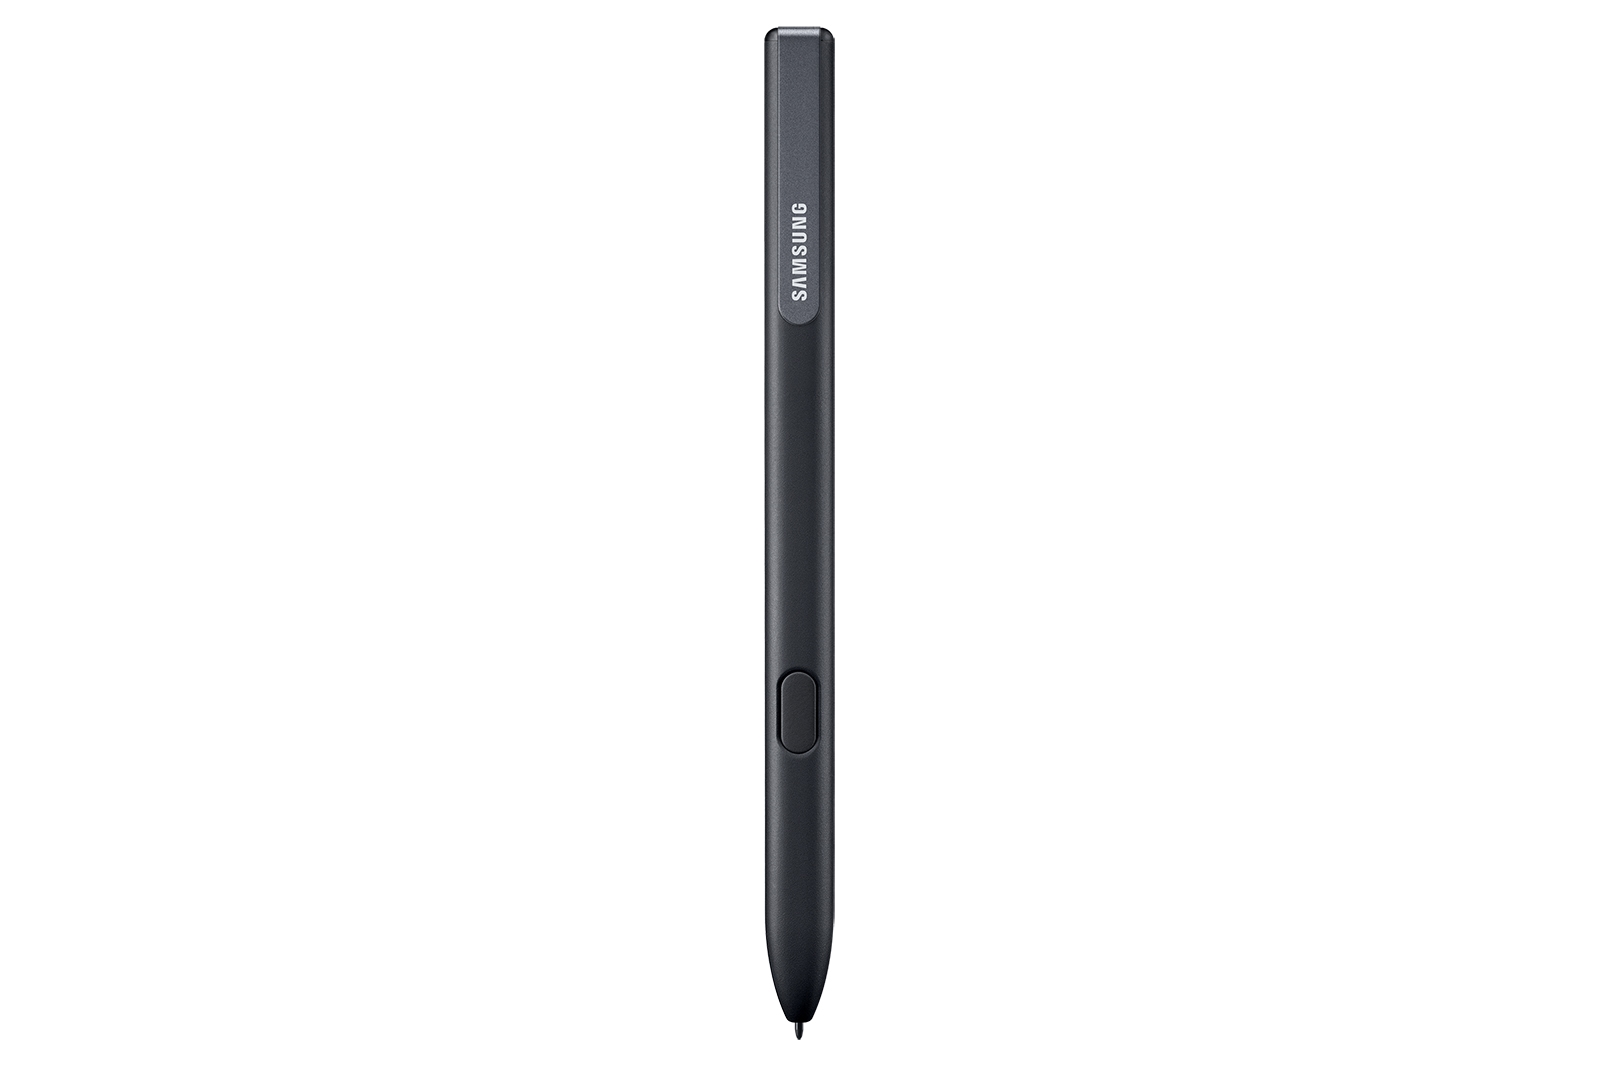 2 penne input NERO ARGENTO TOUCH PEN PENNA PER SAMSUNG GALAXY a41 s10 sm-g97 